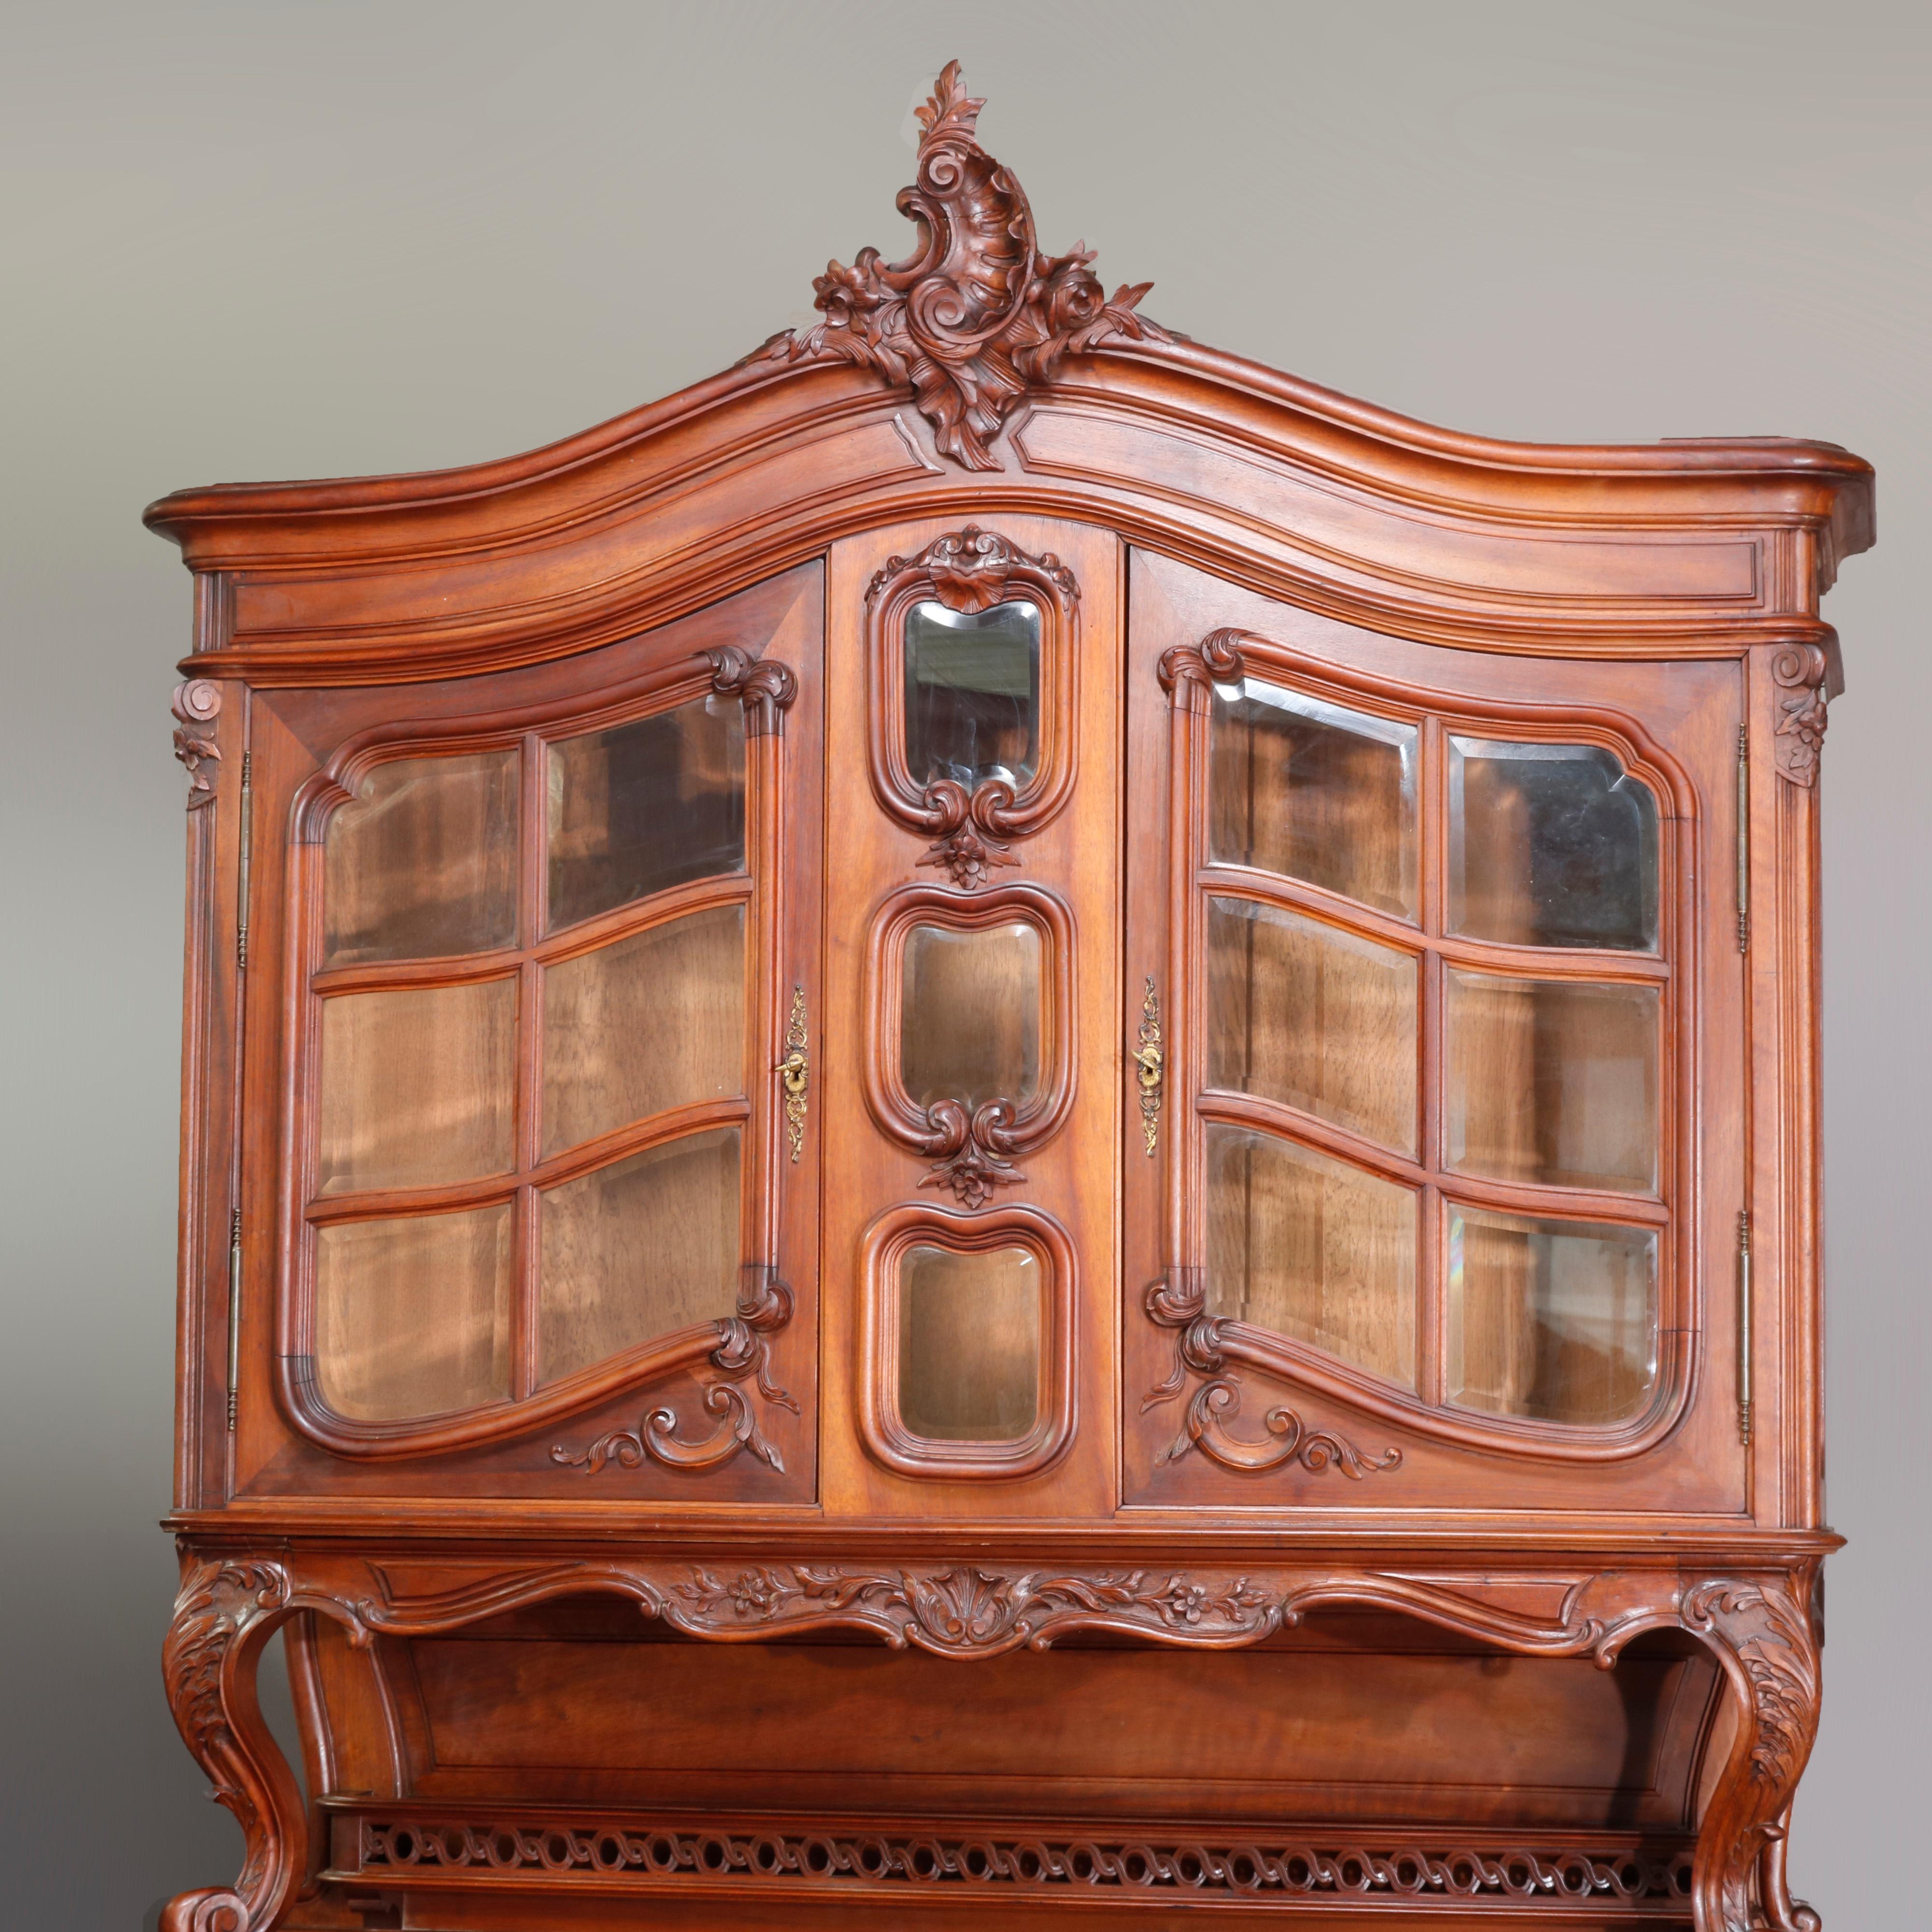 Antique French Rococo carved walnut cupboard with arched crest having foliate carved cartouche over shaped double doors with beveled panels and central beveled glass column, surmounting galleried backsplash with flanking acanthus scroll form